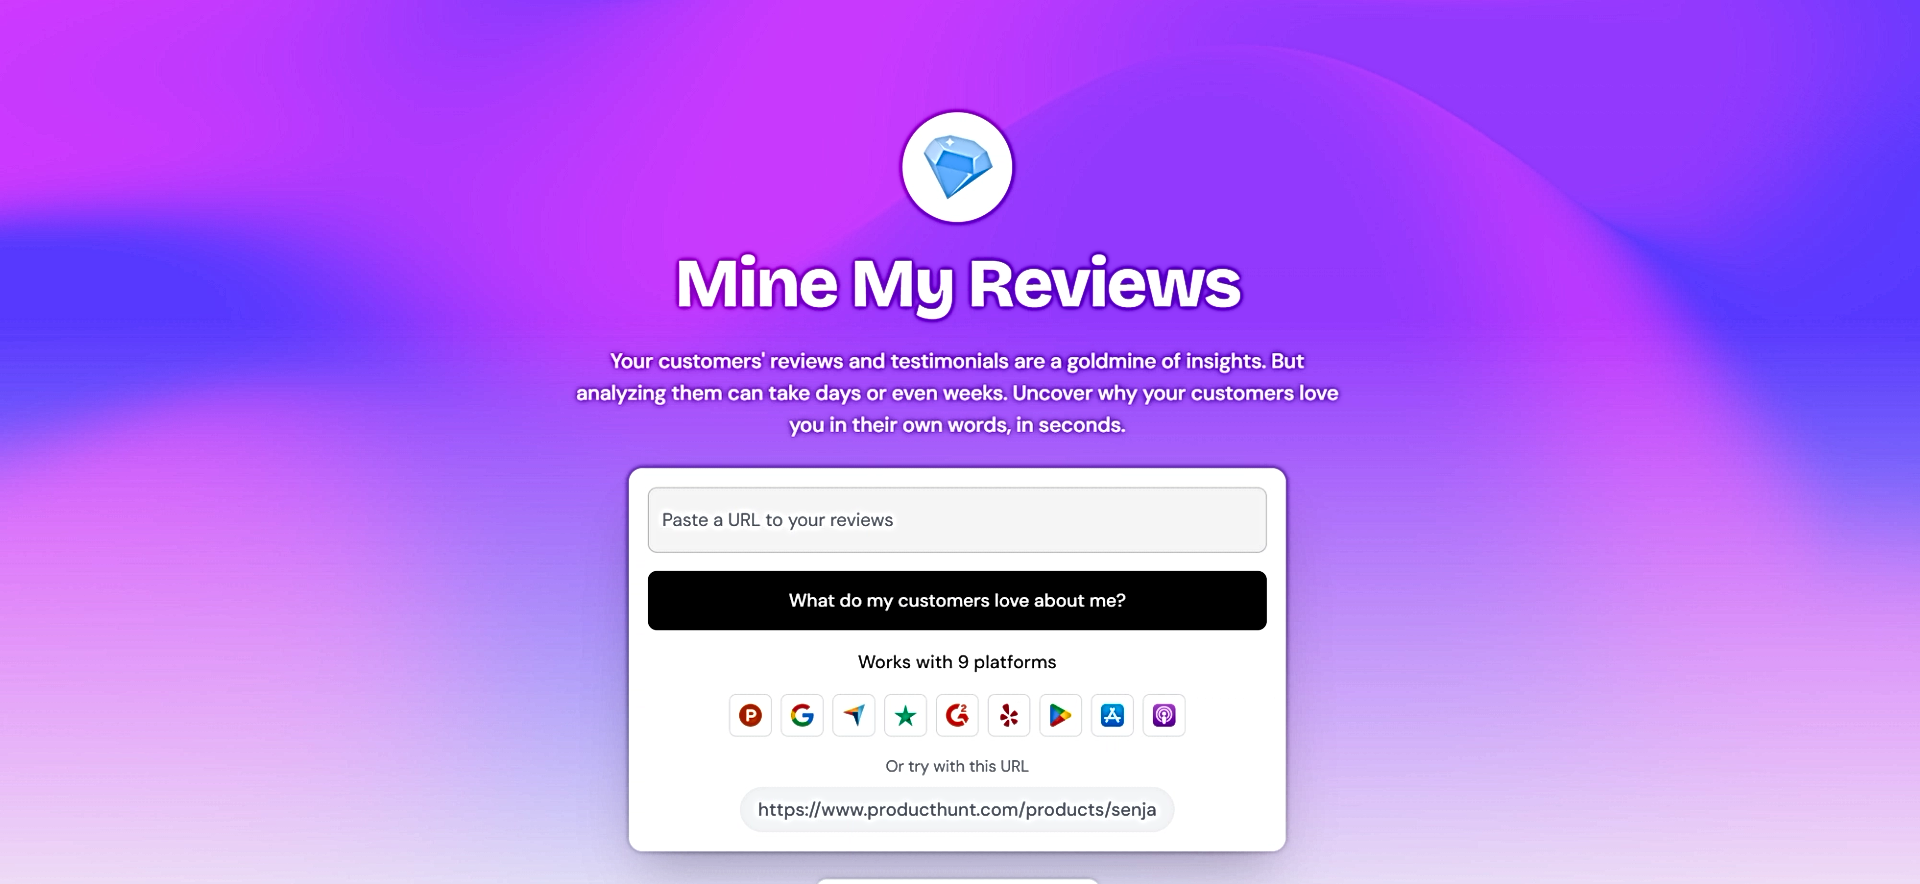 Mine My Reviews featured